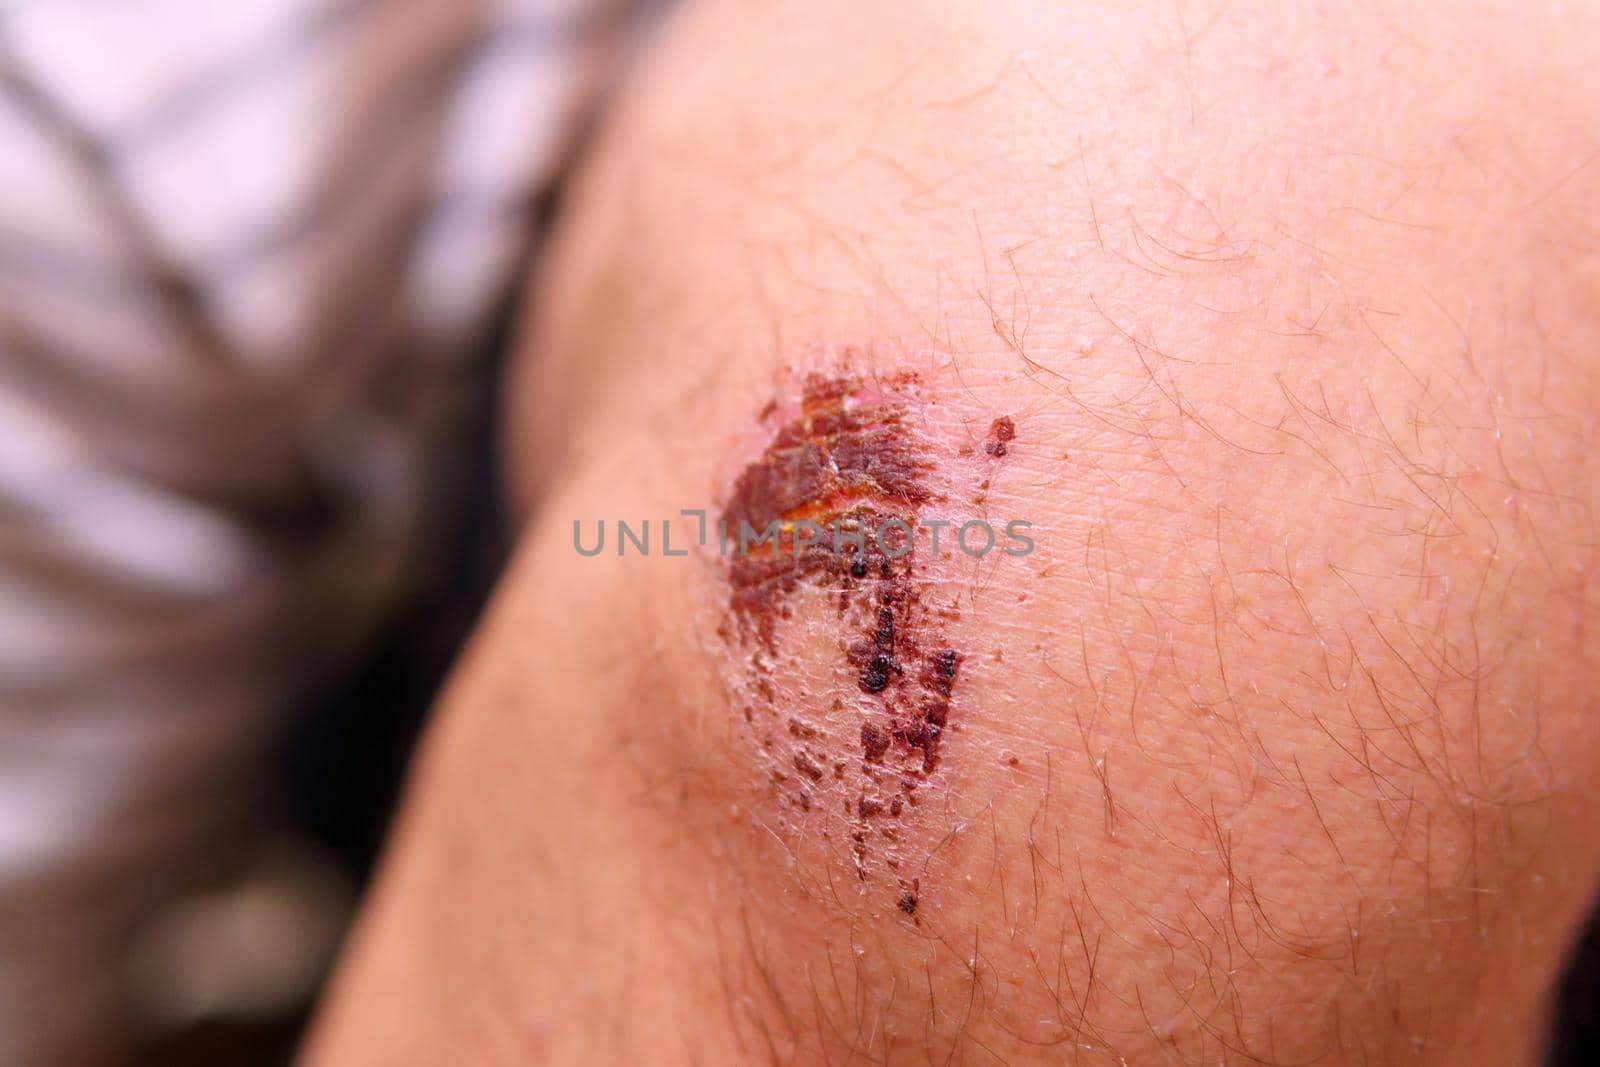 Deep scratches on the skin with bruises on knee. close-up selective focus by darksoul72